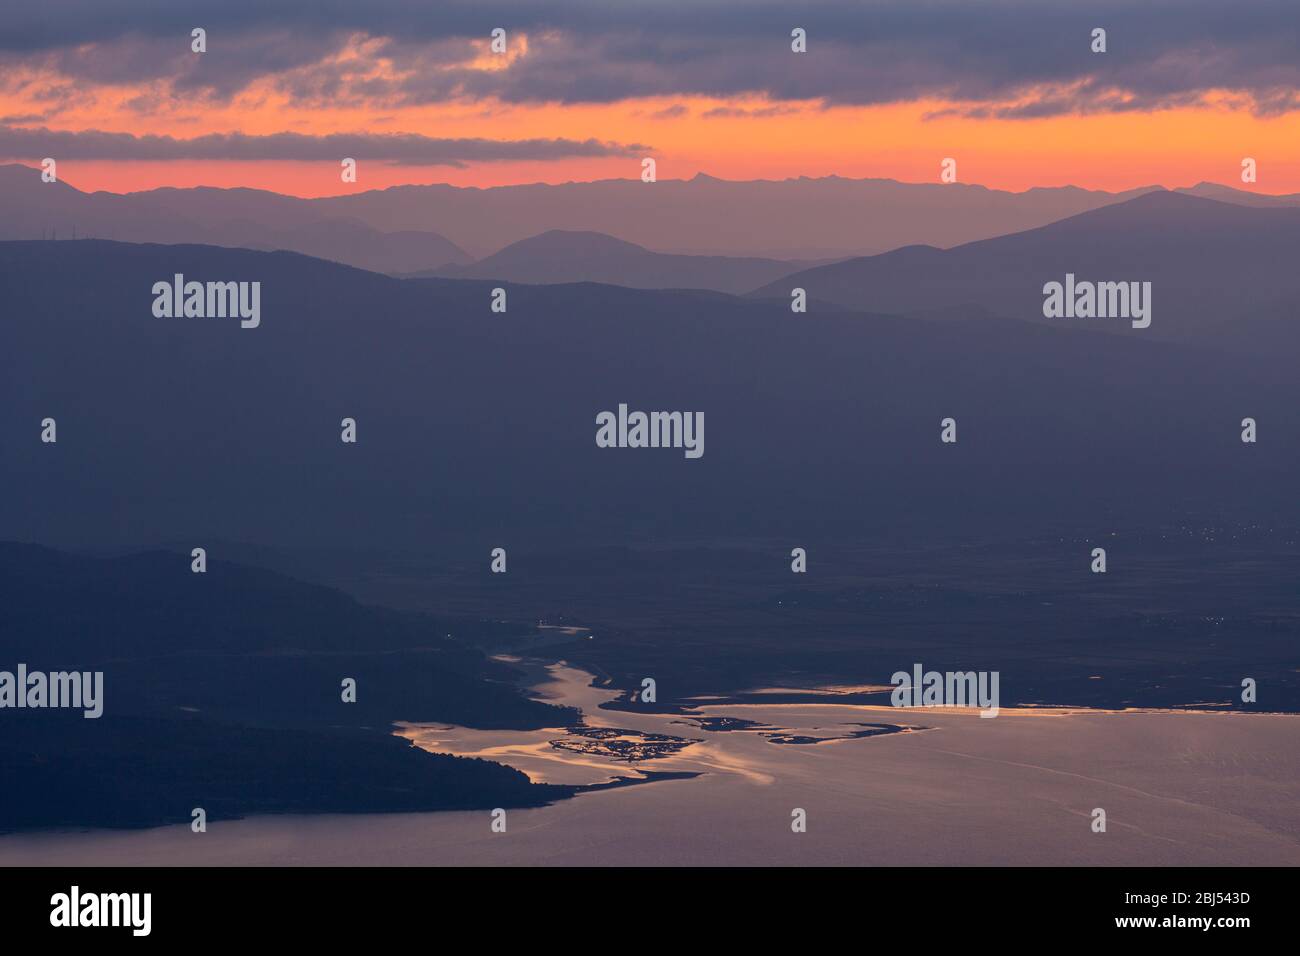 Landscape view of Albanian coastline before sunrise as seen from the summit of Mount Pantokrator, Corfu, Greece Stock Photo